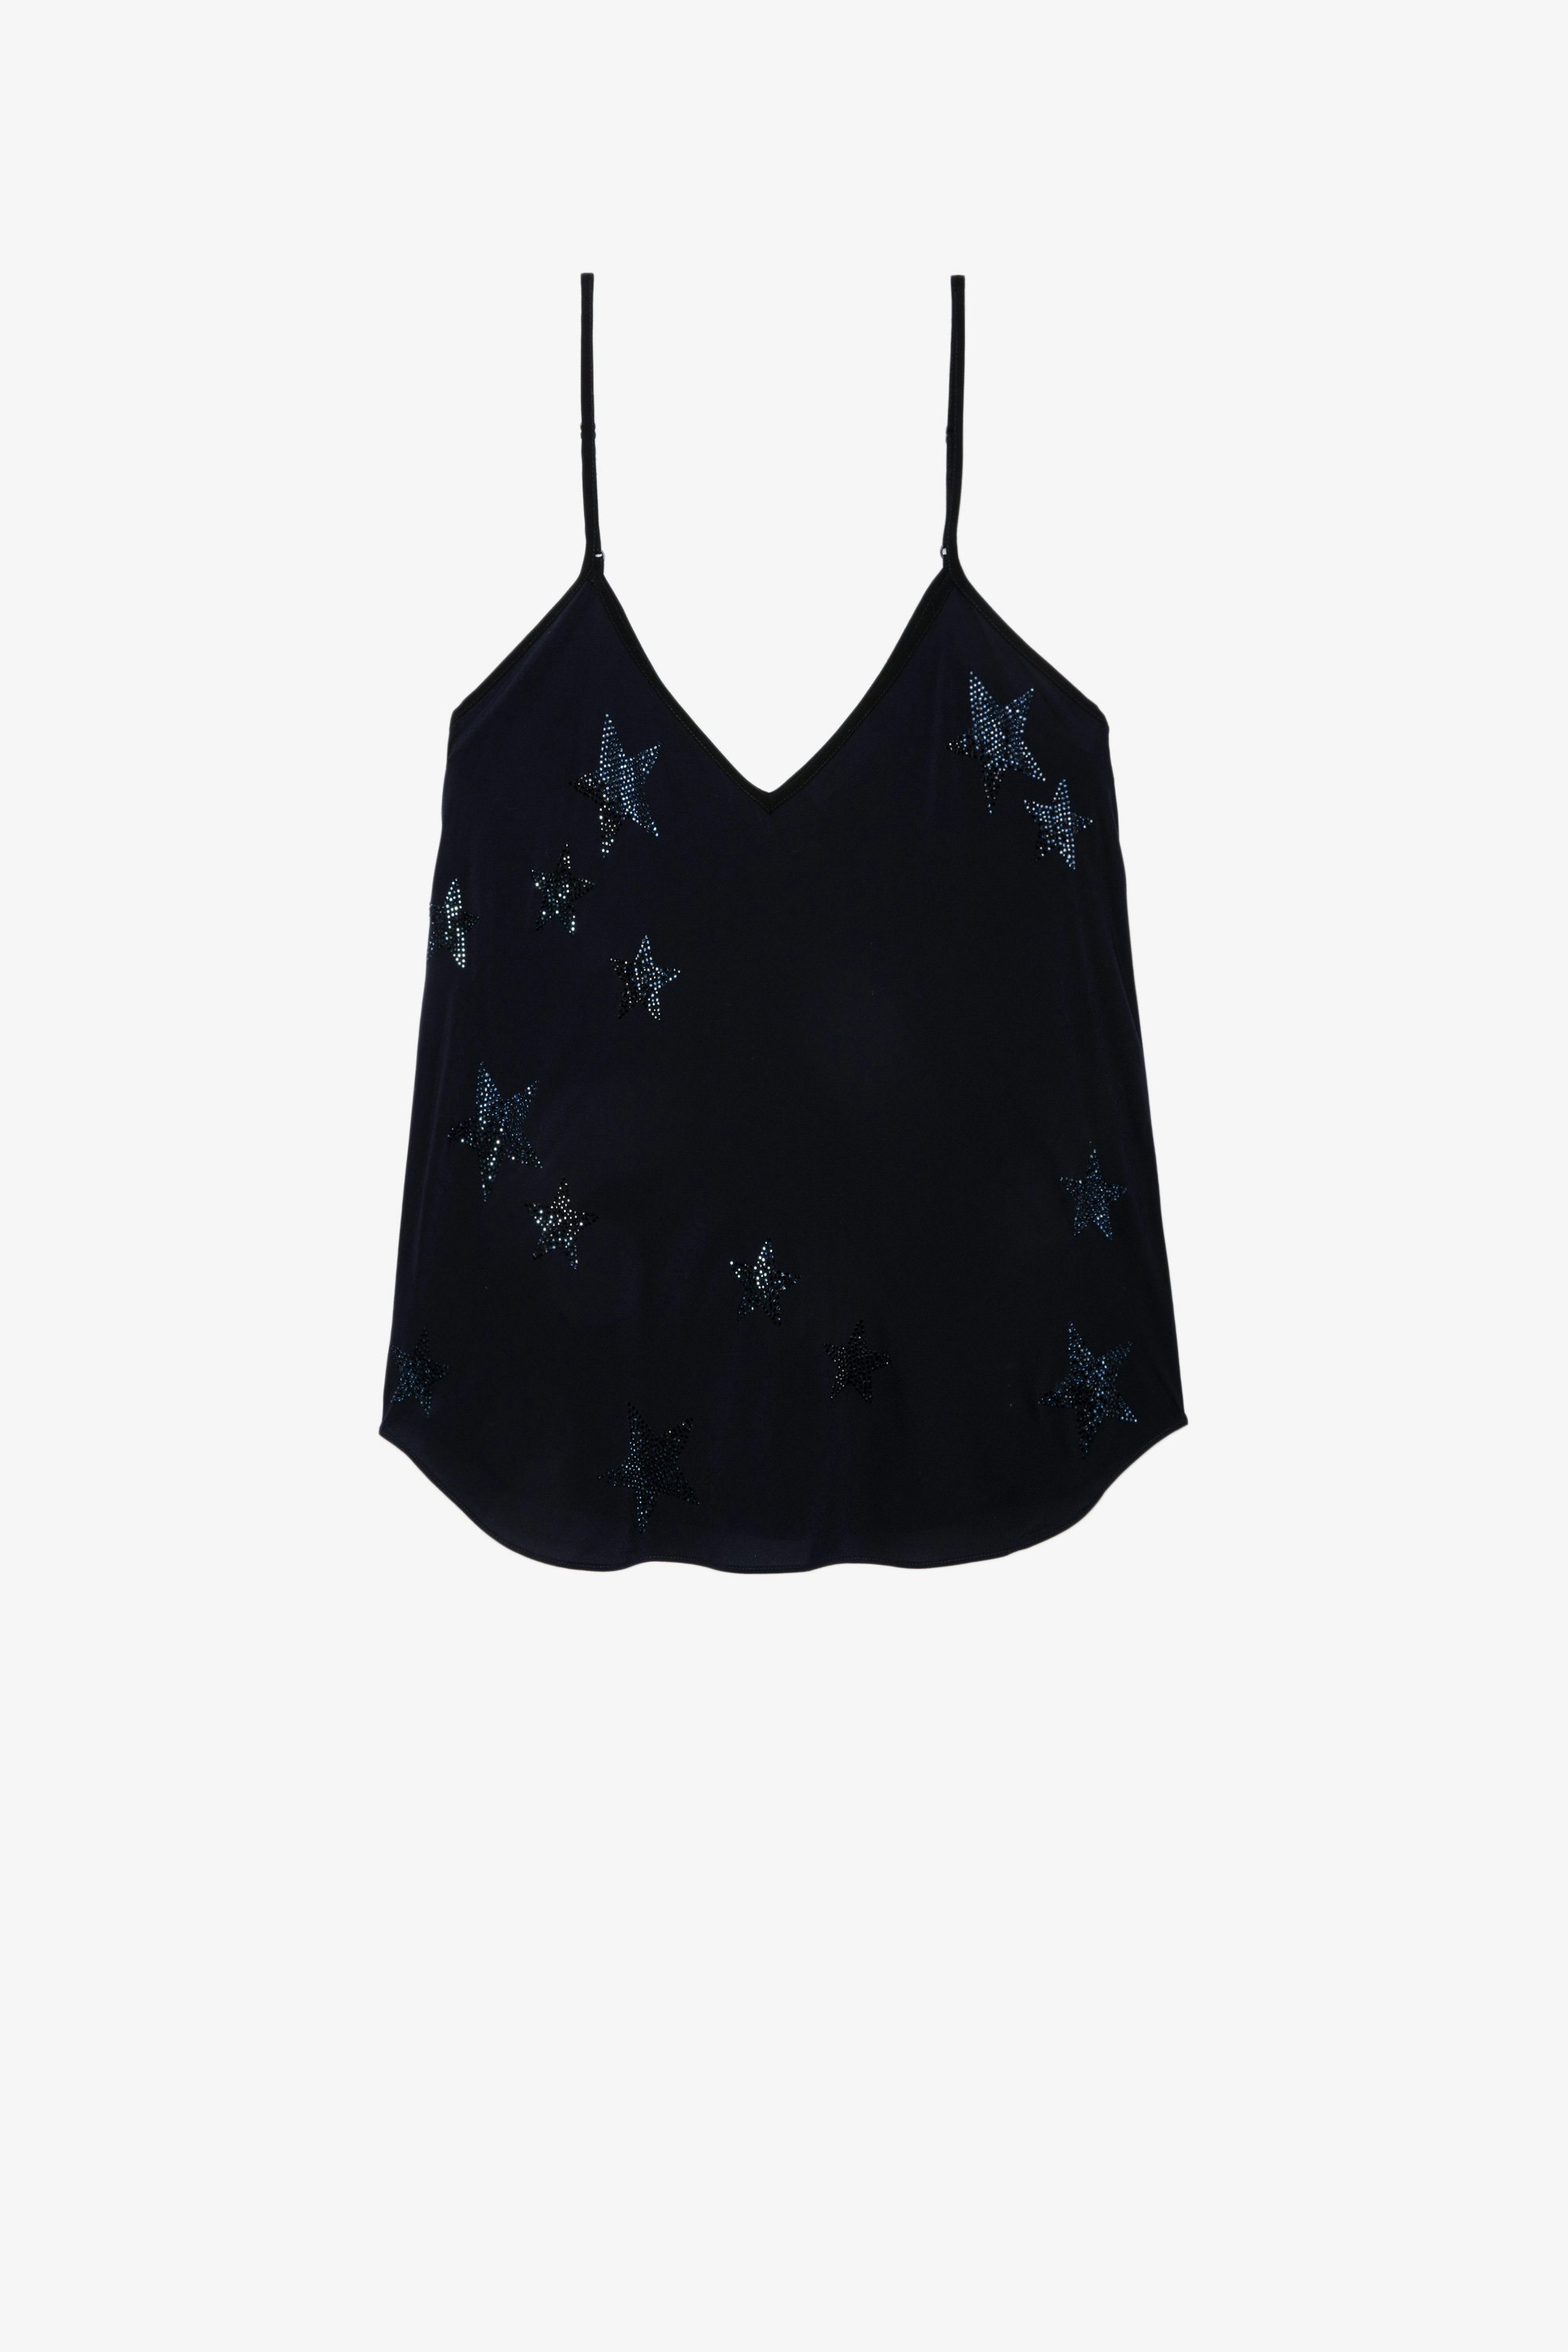 Casel Soft Diamanté Stars Camisole Women’s navy blue camisole with thin straps and crystal-embellished stars